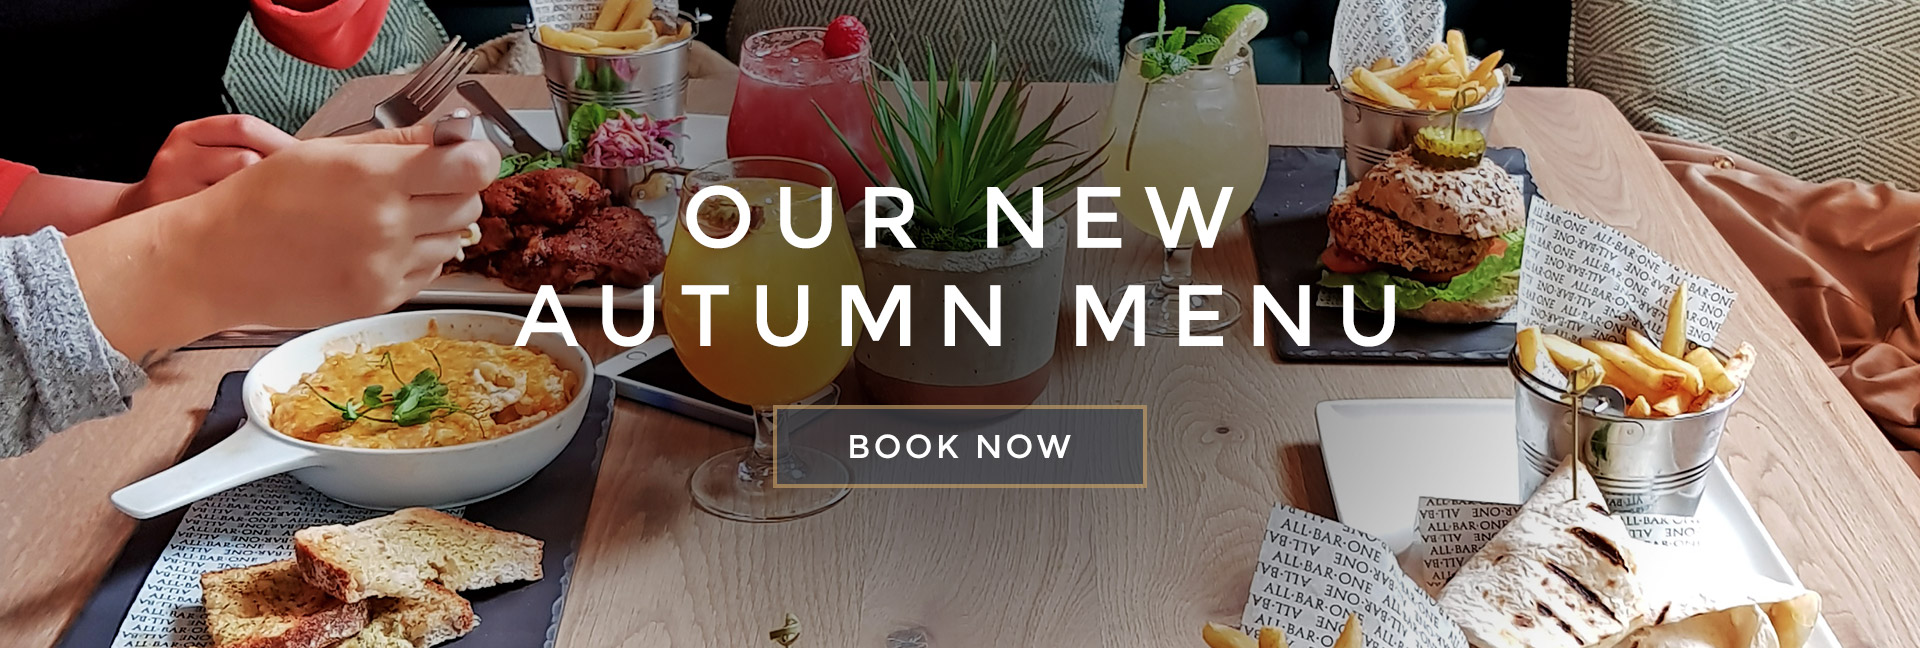 Our new Autumn menu at All Bar One Newcastle - Book now